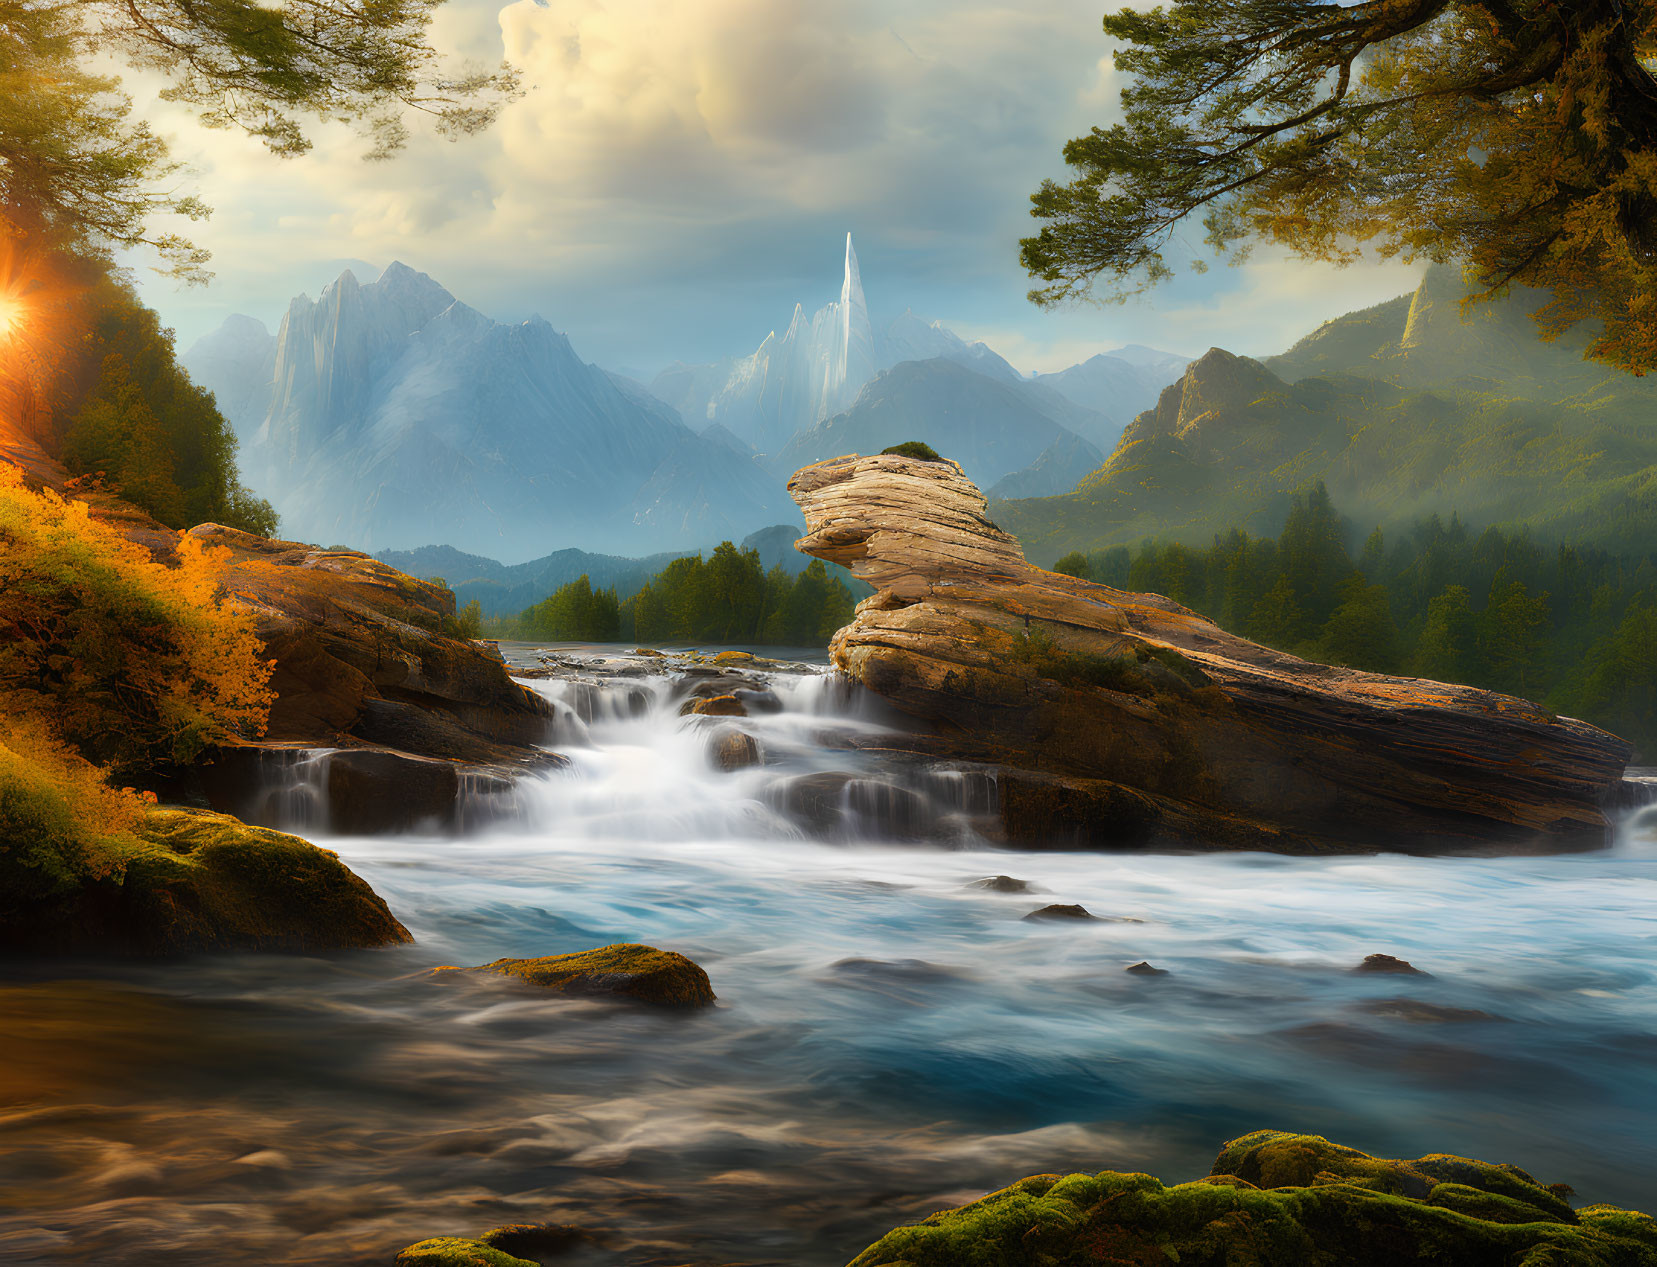 Scenic landscape with cascading river, lush trees, and mountains